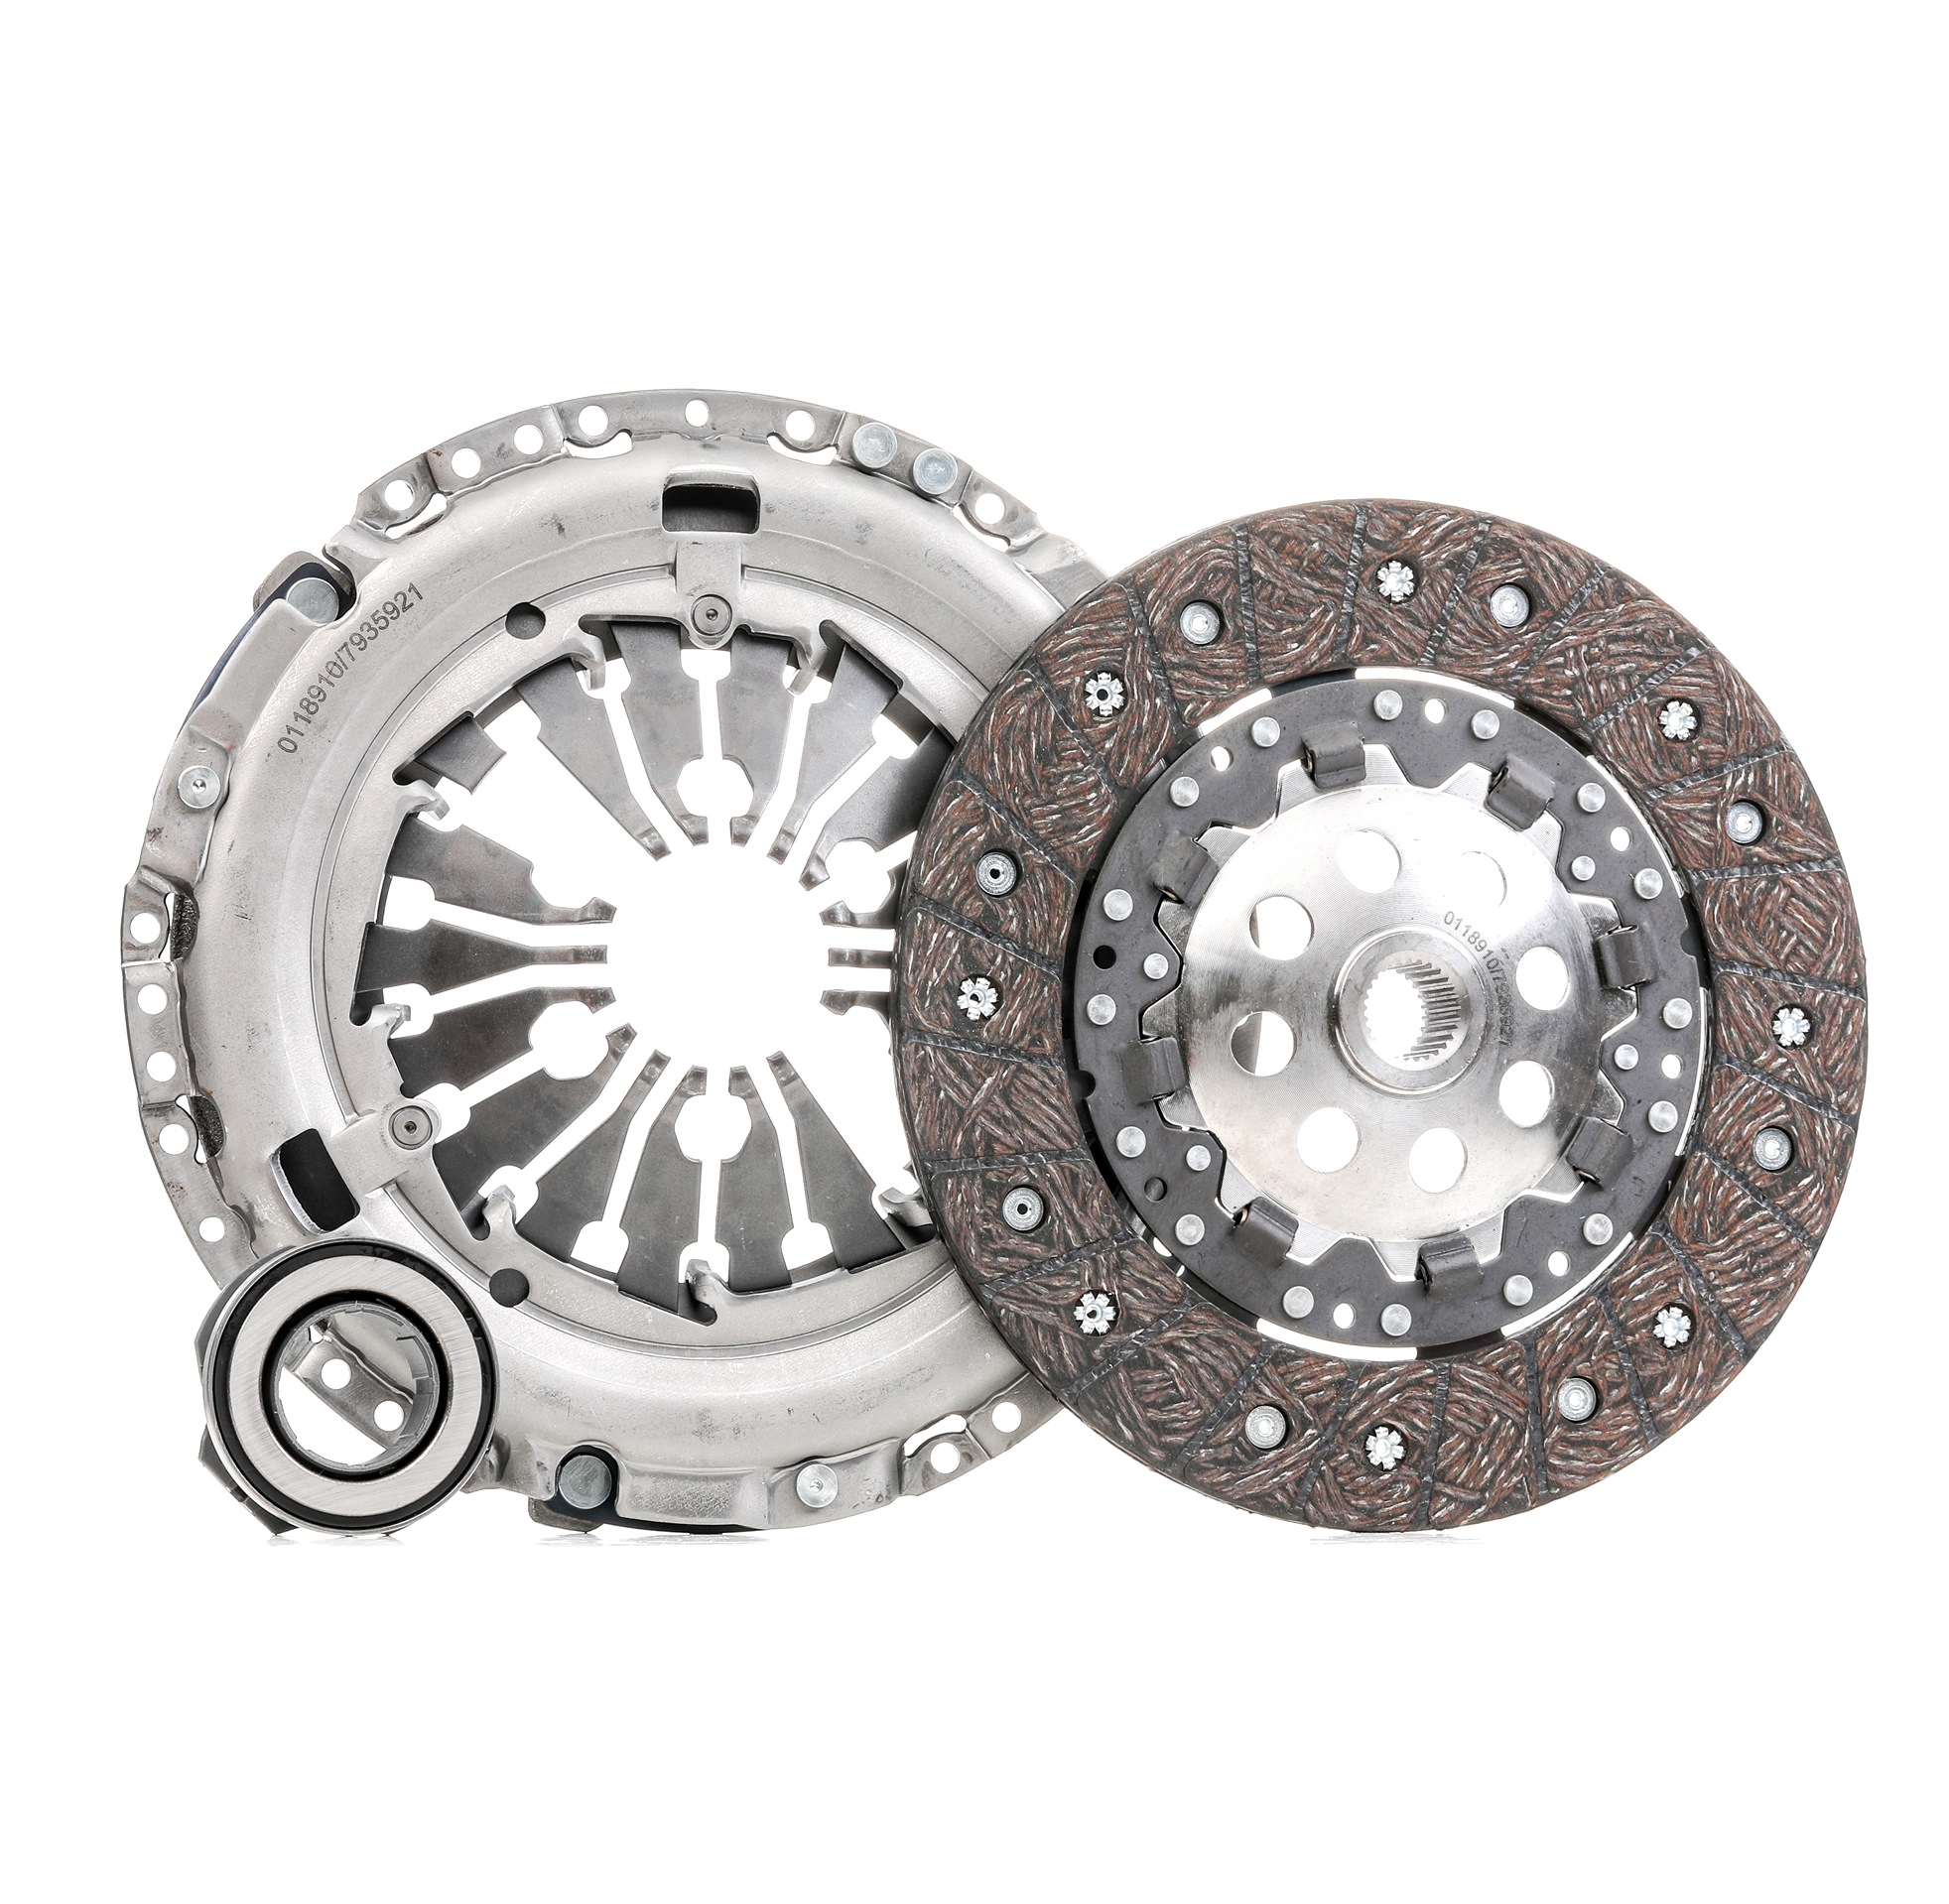 STARK SKCK-0100023 Clutch kit for engines with dual-mass flywheel, with clutch release bearing, with clutch disc, Check and replace dual-mass flywheel if necessary., 230mm